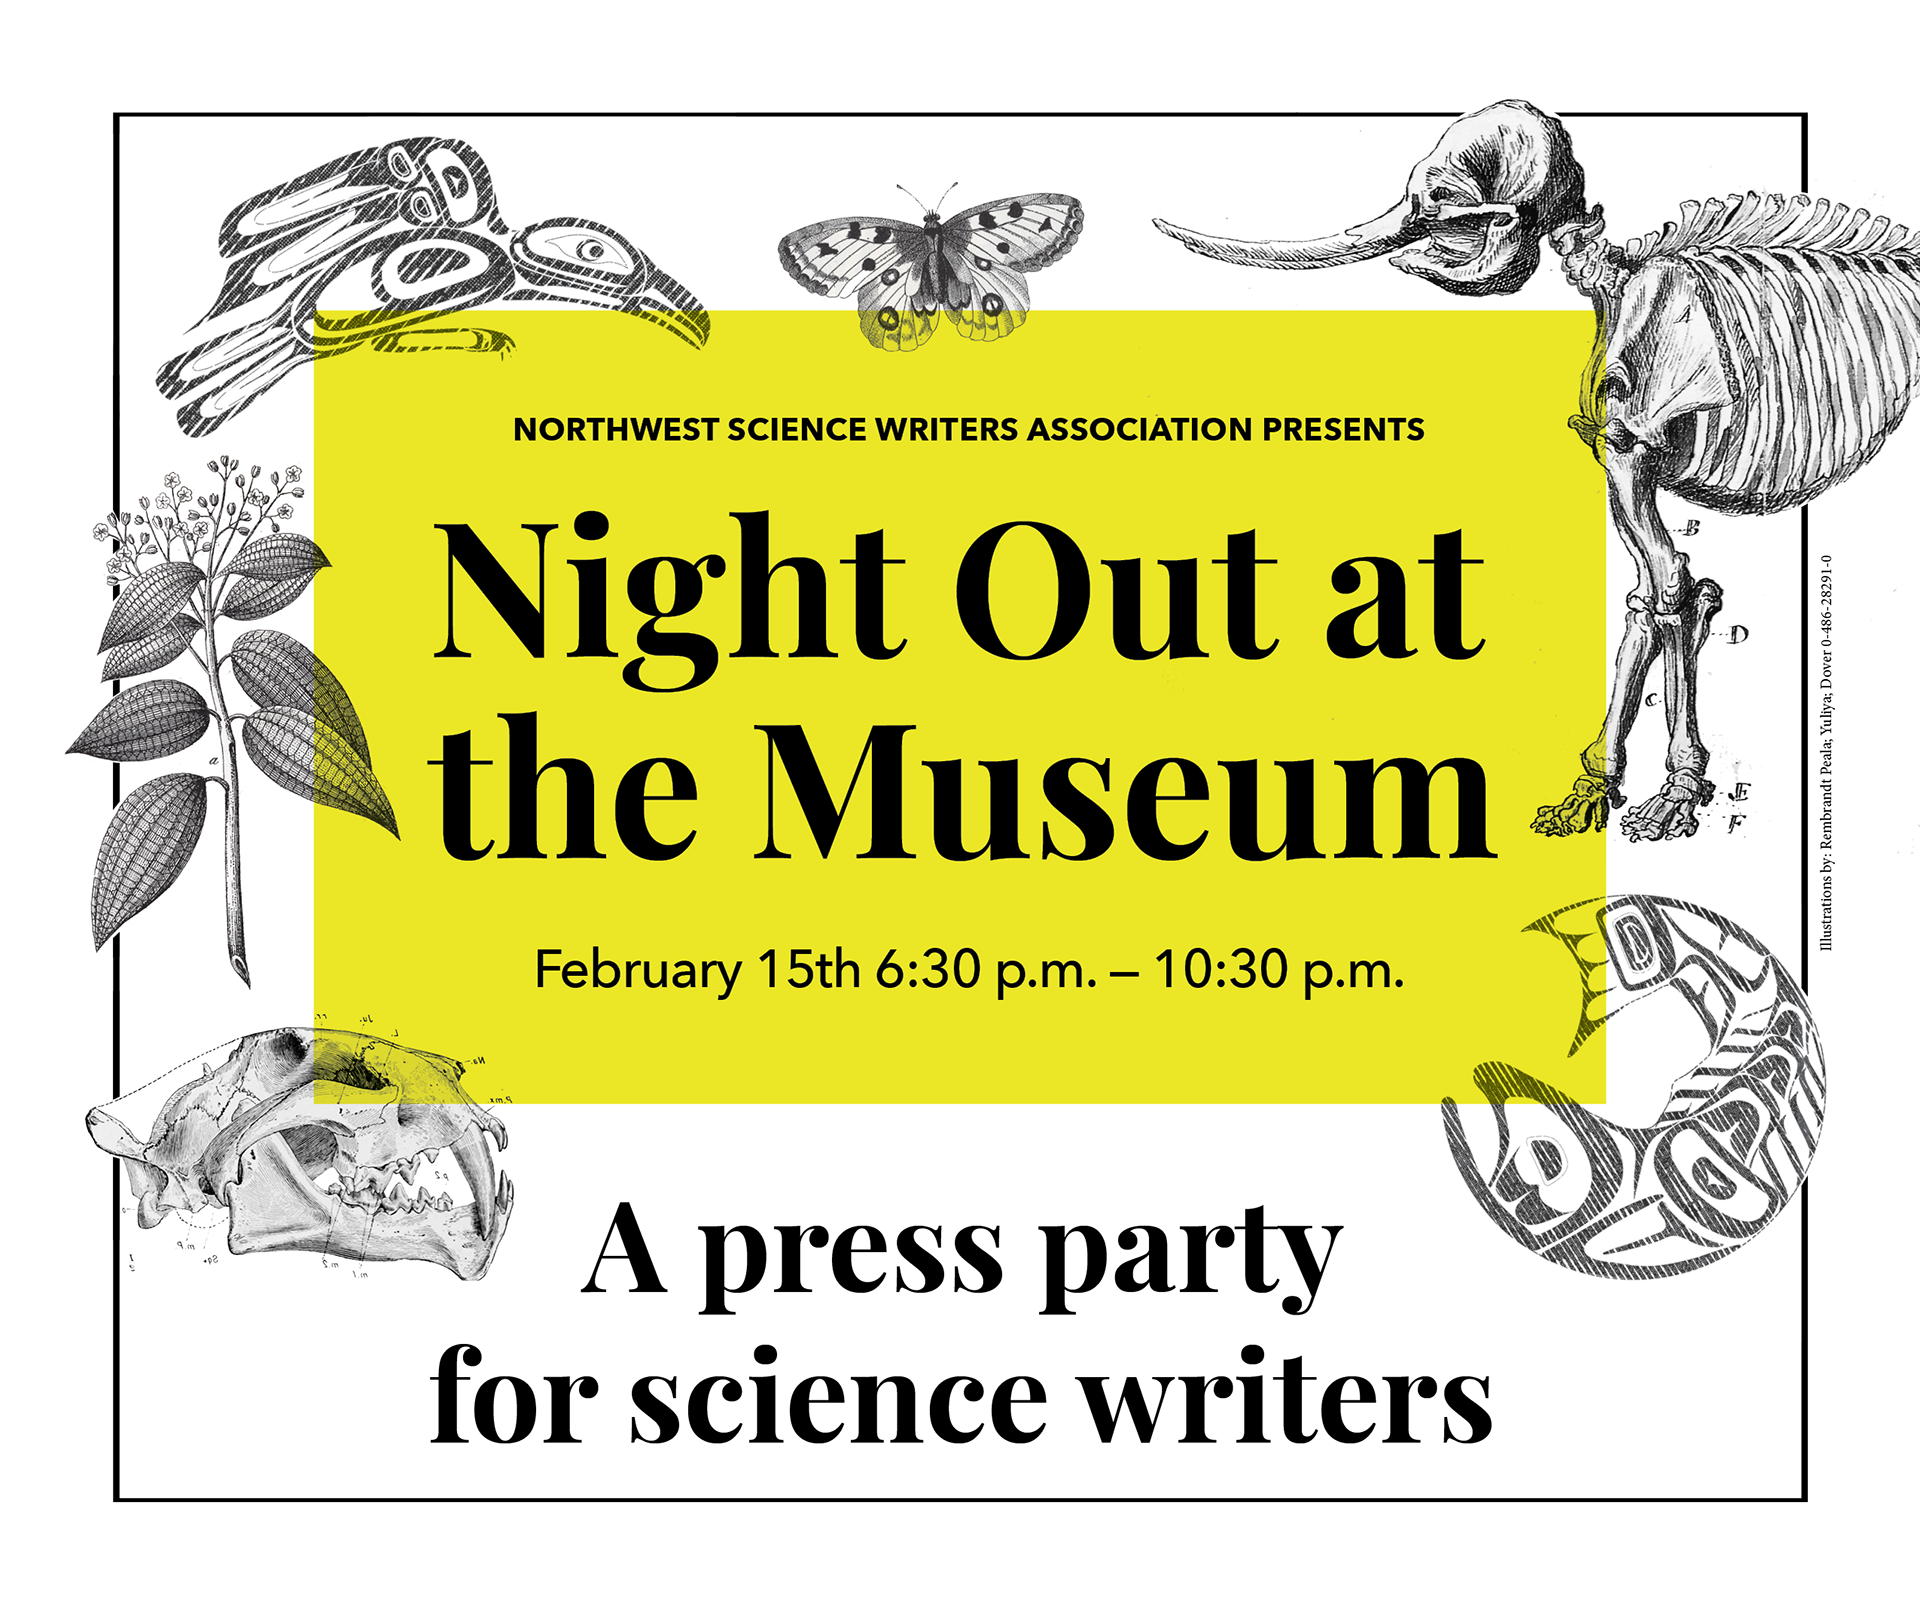 NSWA presents Night Out at the Museum, a press party for science writers